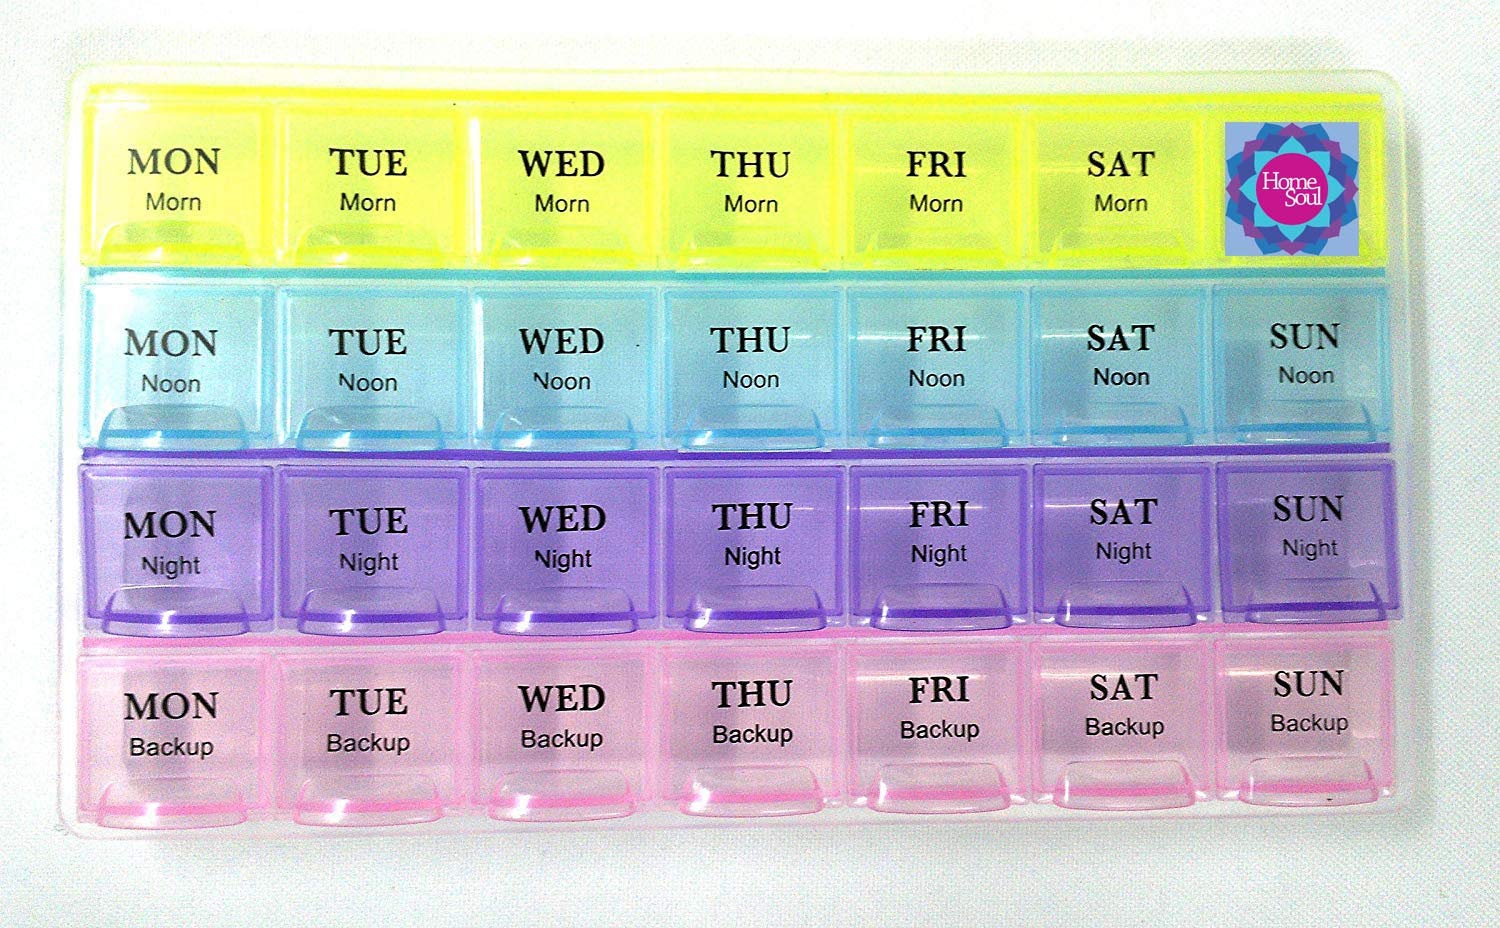 Does use pill organizers will help you with your medications?